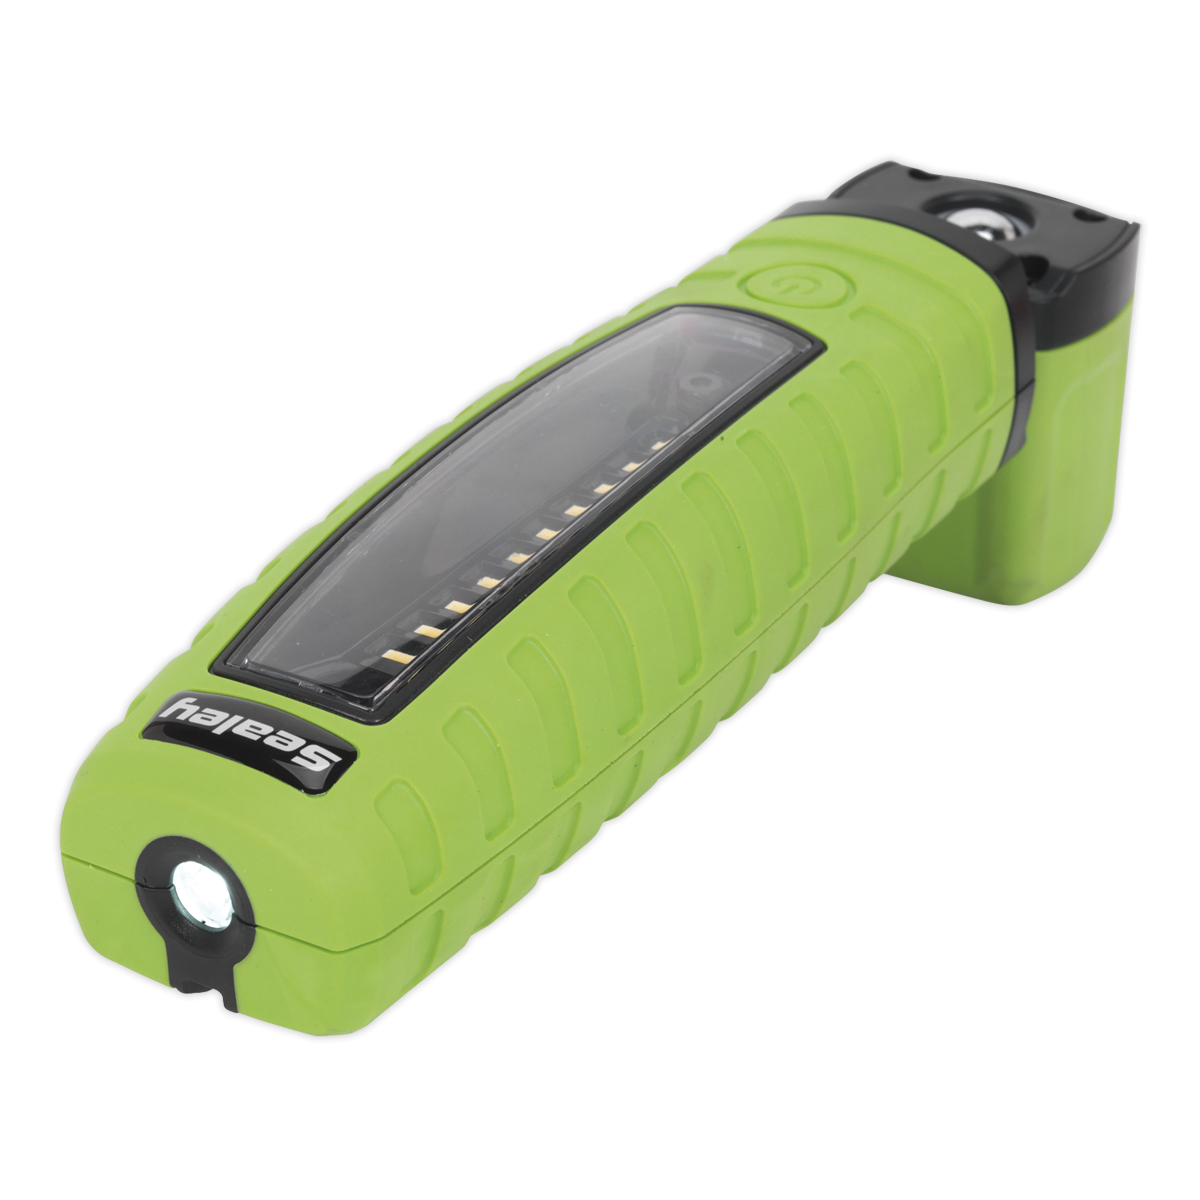 Sealey led torch